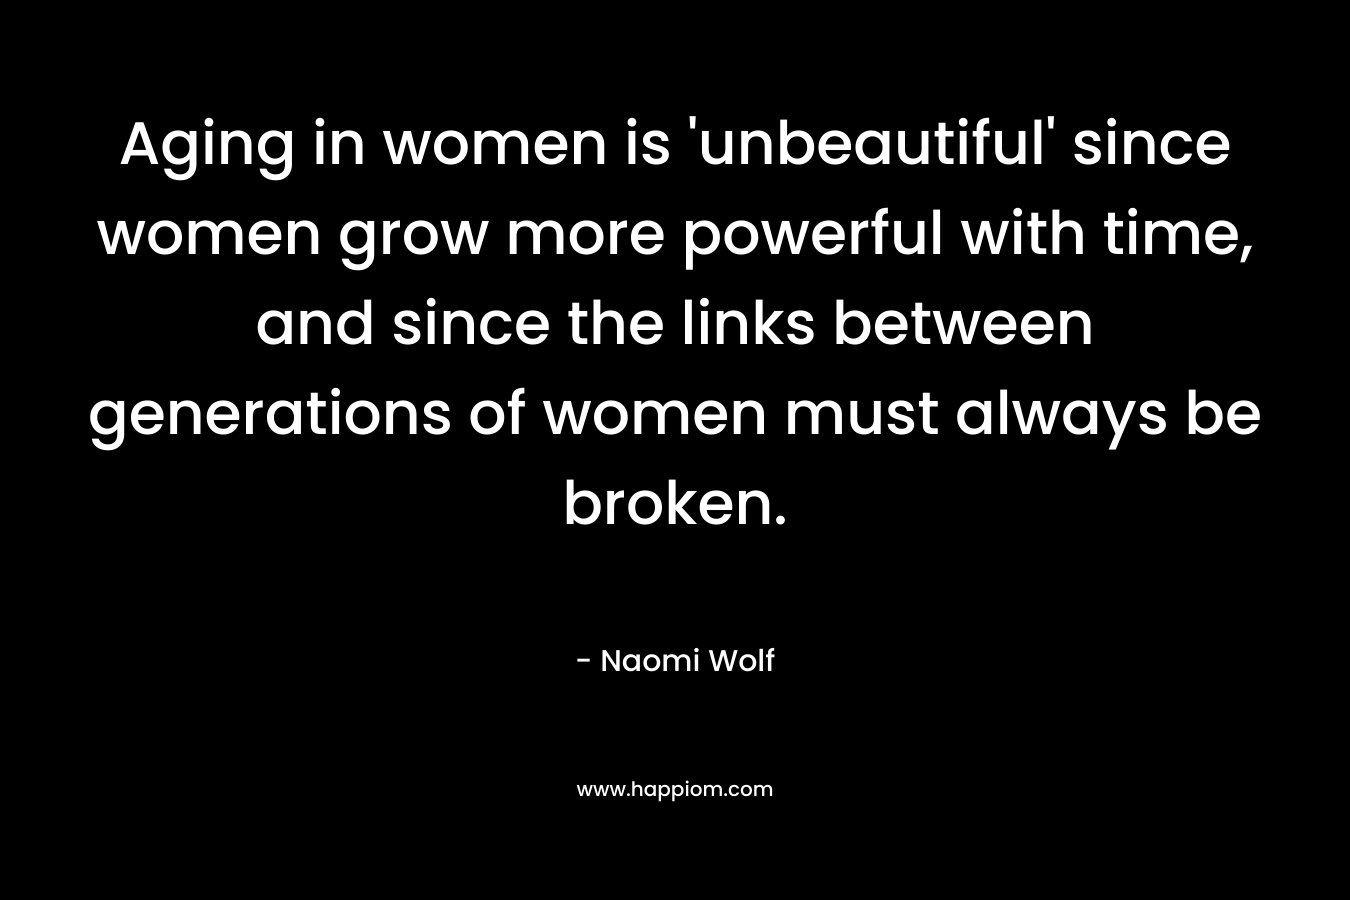 Aging in women is 'unbeautiful' since women grow more powerful with time, and since the links between generations of women must always be broken.